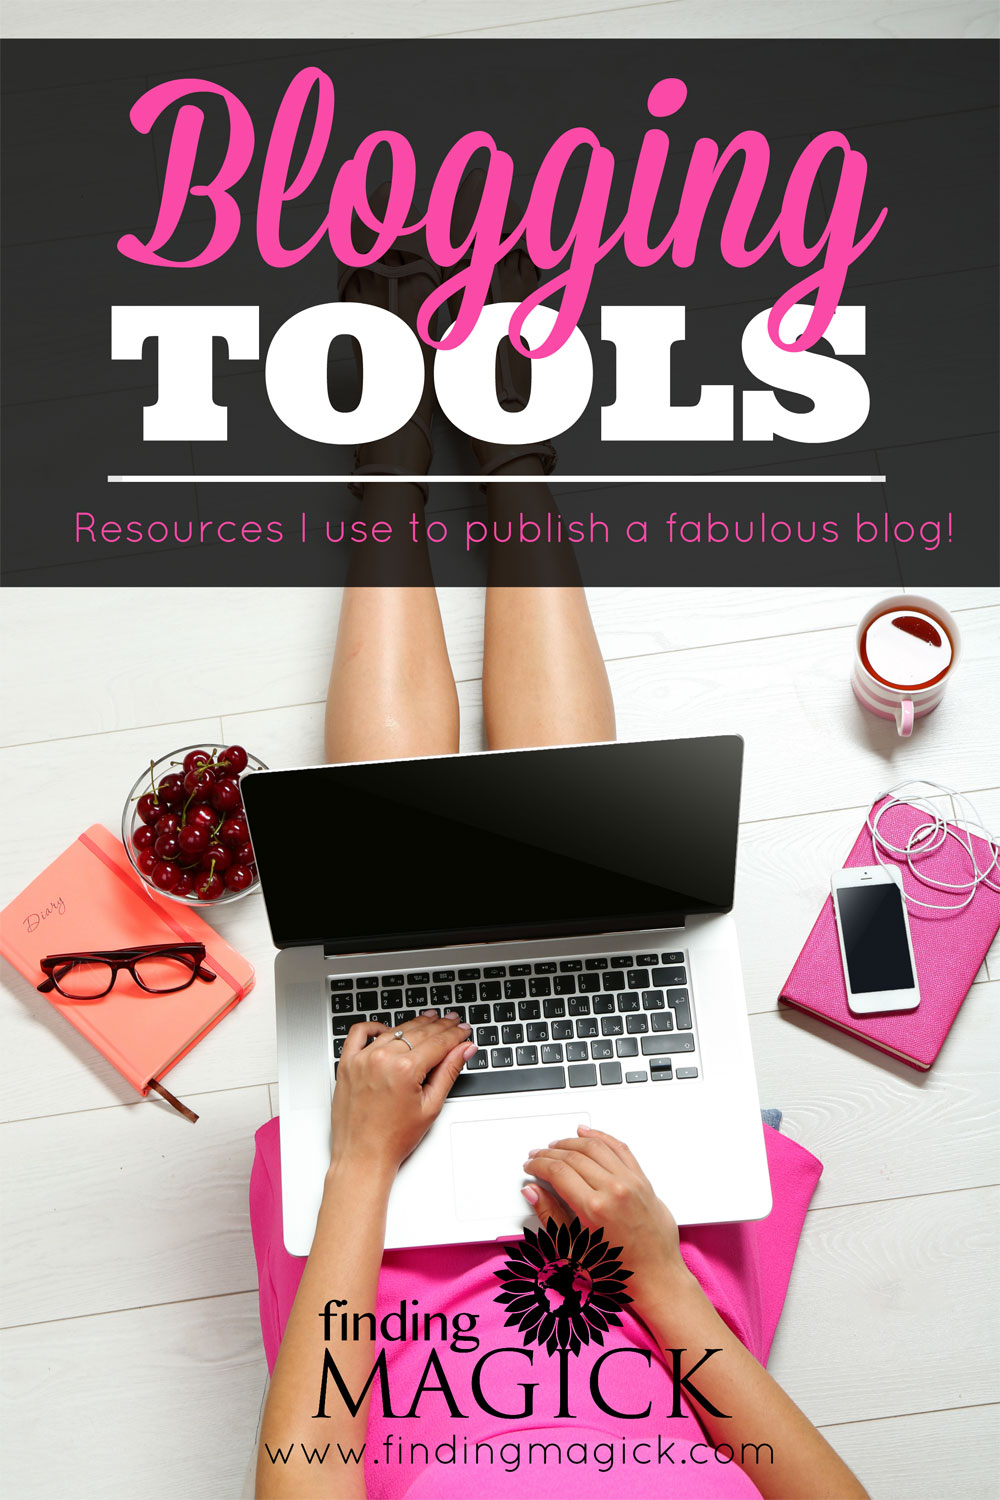 Blogging Tools, Tips and Ideas for Publishing a Fantastic Website. Are you starting a blog and need a little 101? These are my resources for starting a blog, creating social media posts, designing beautiful images and more! Tips, tricks and inspiration!